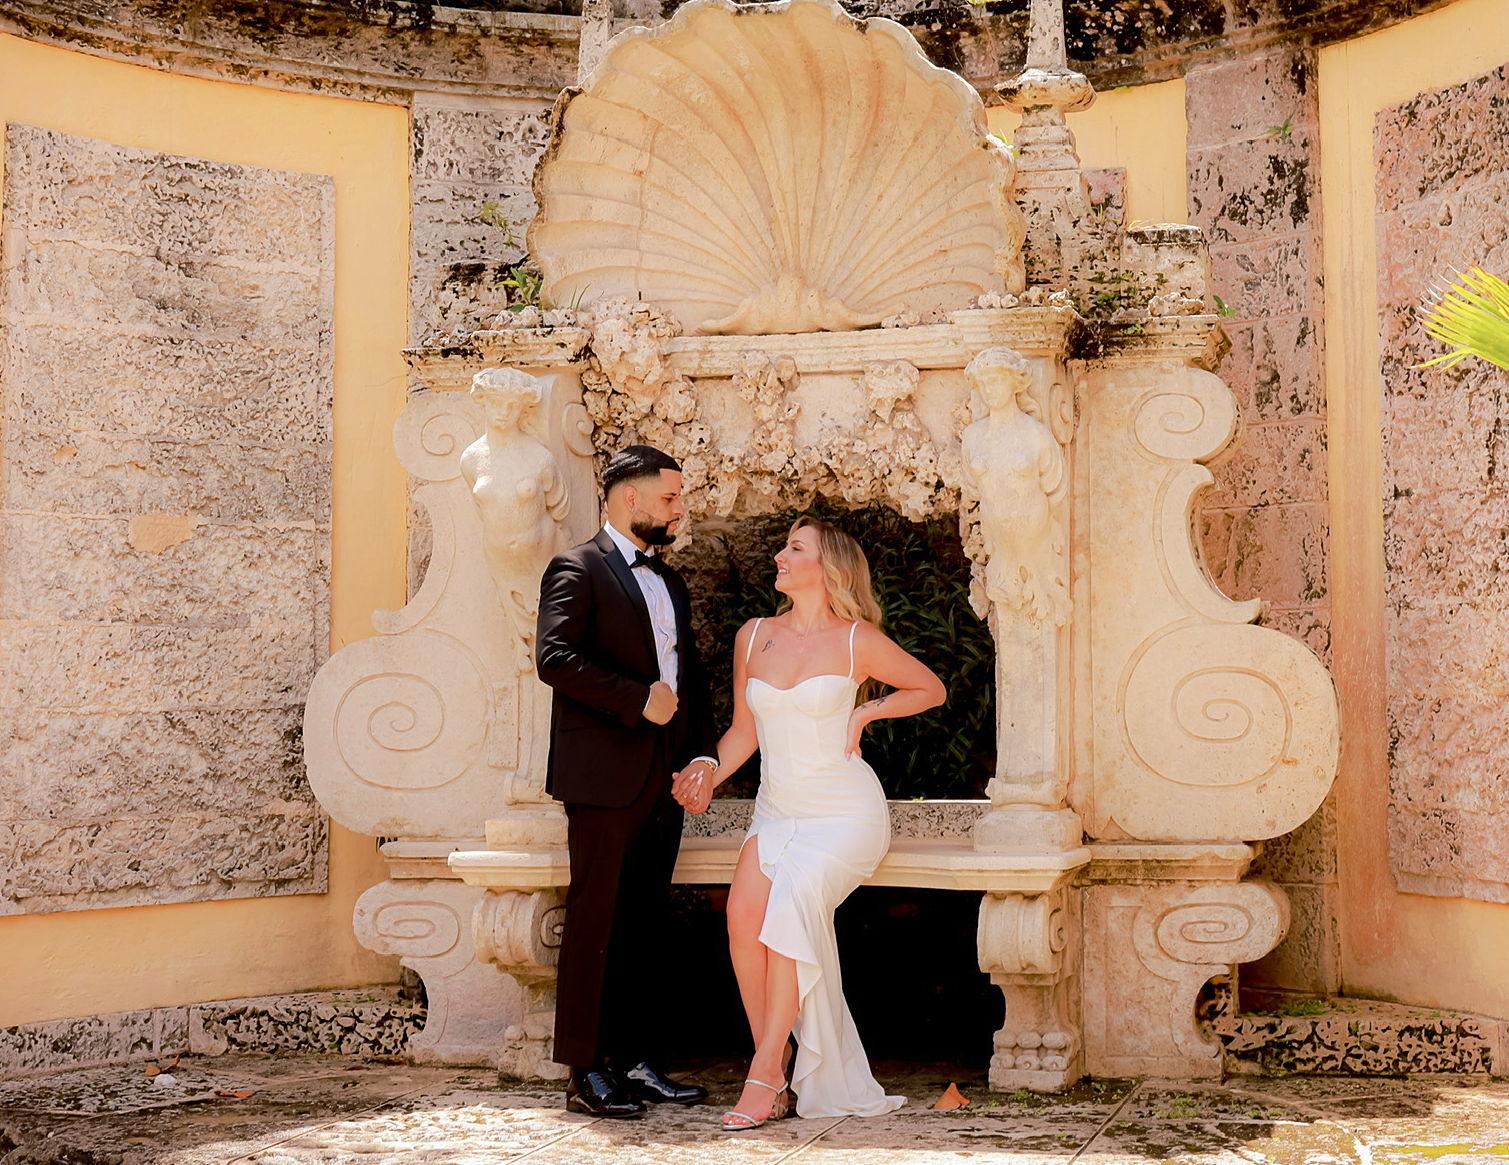 The Wedding Website of Serena Troise and Mario Caceres